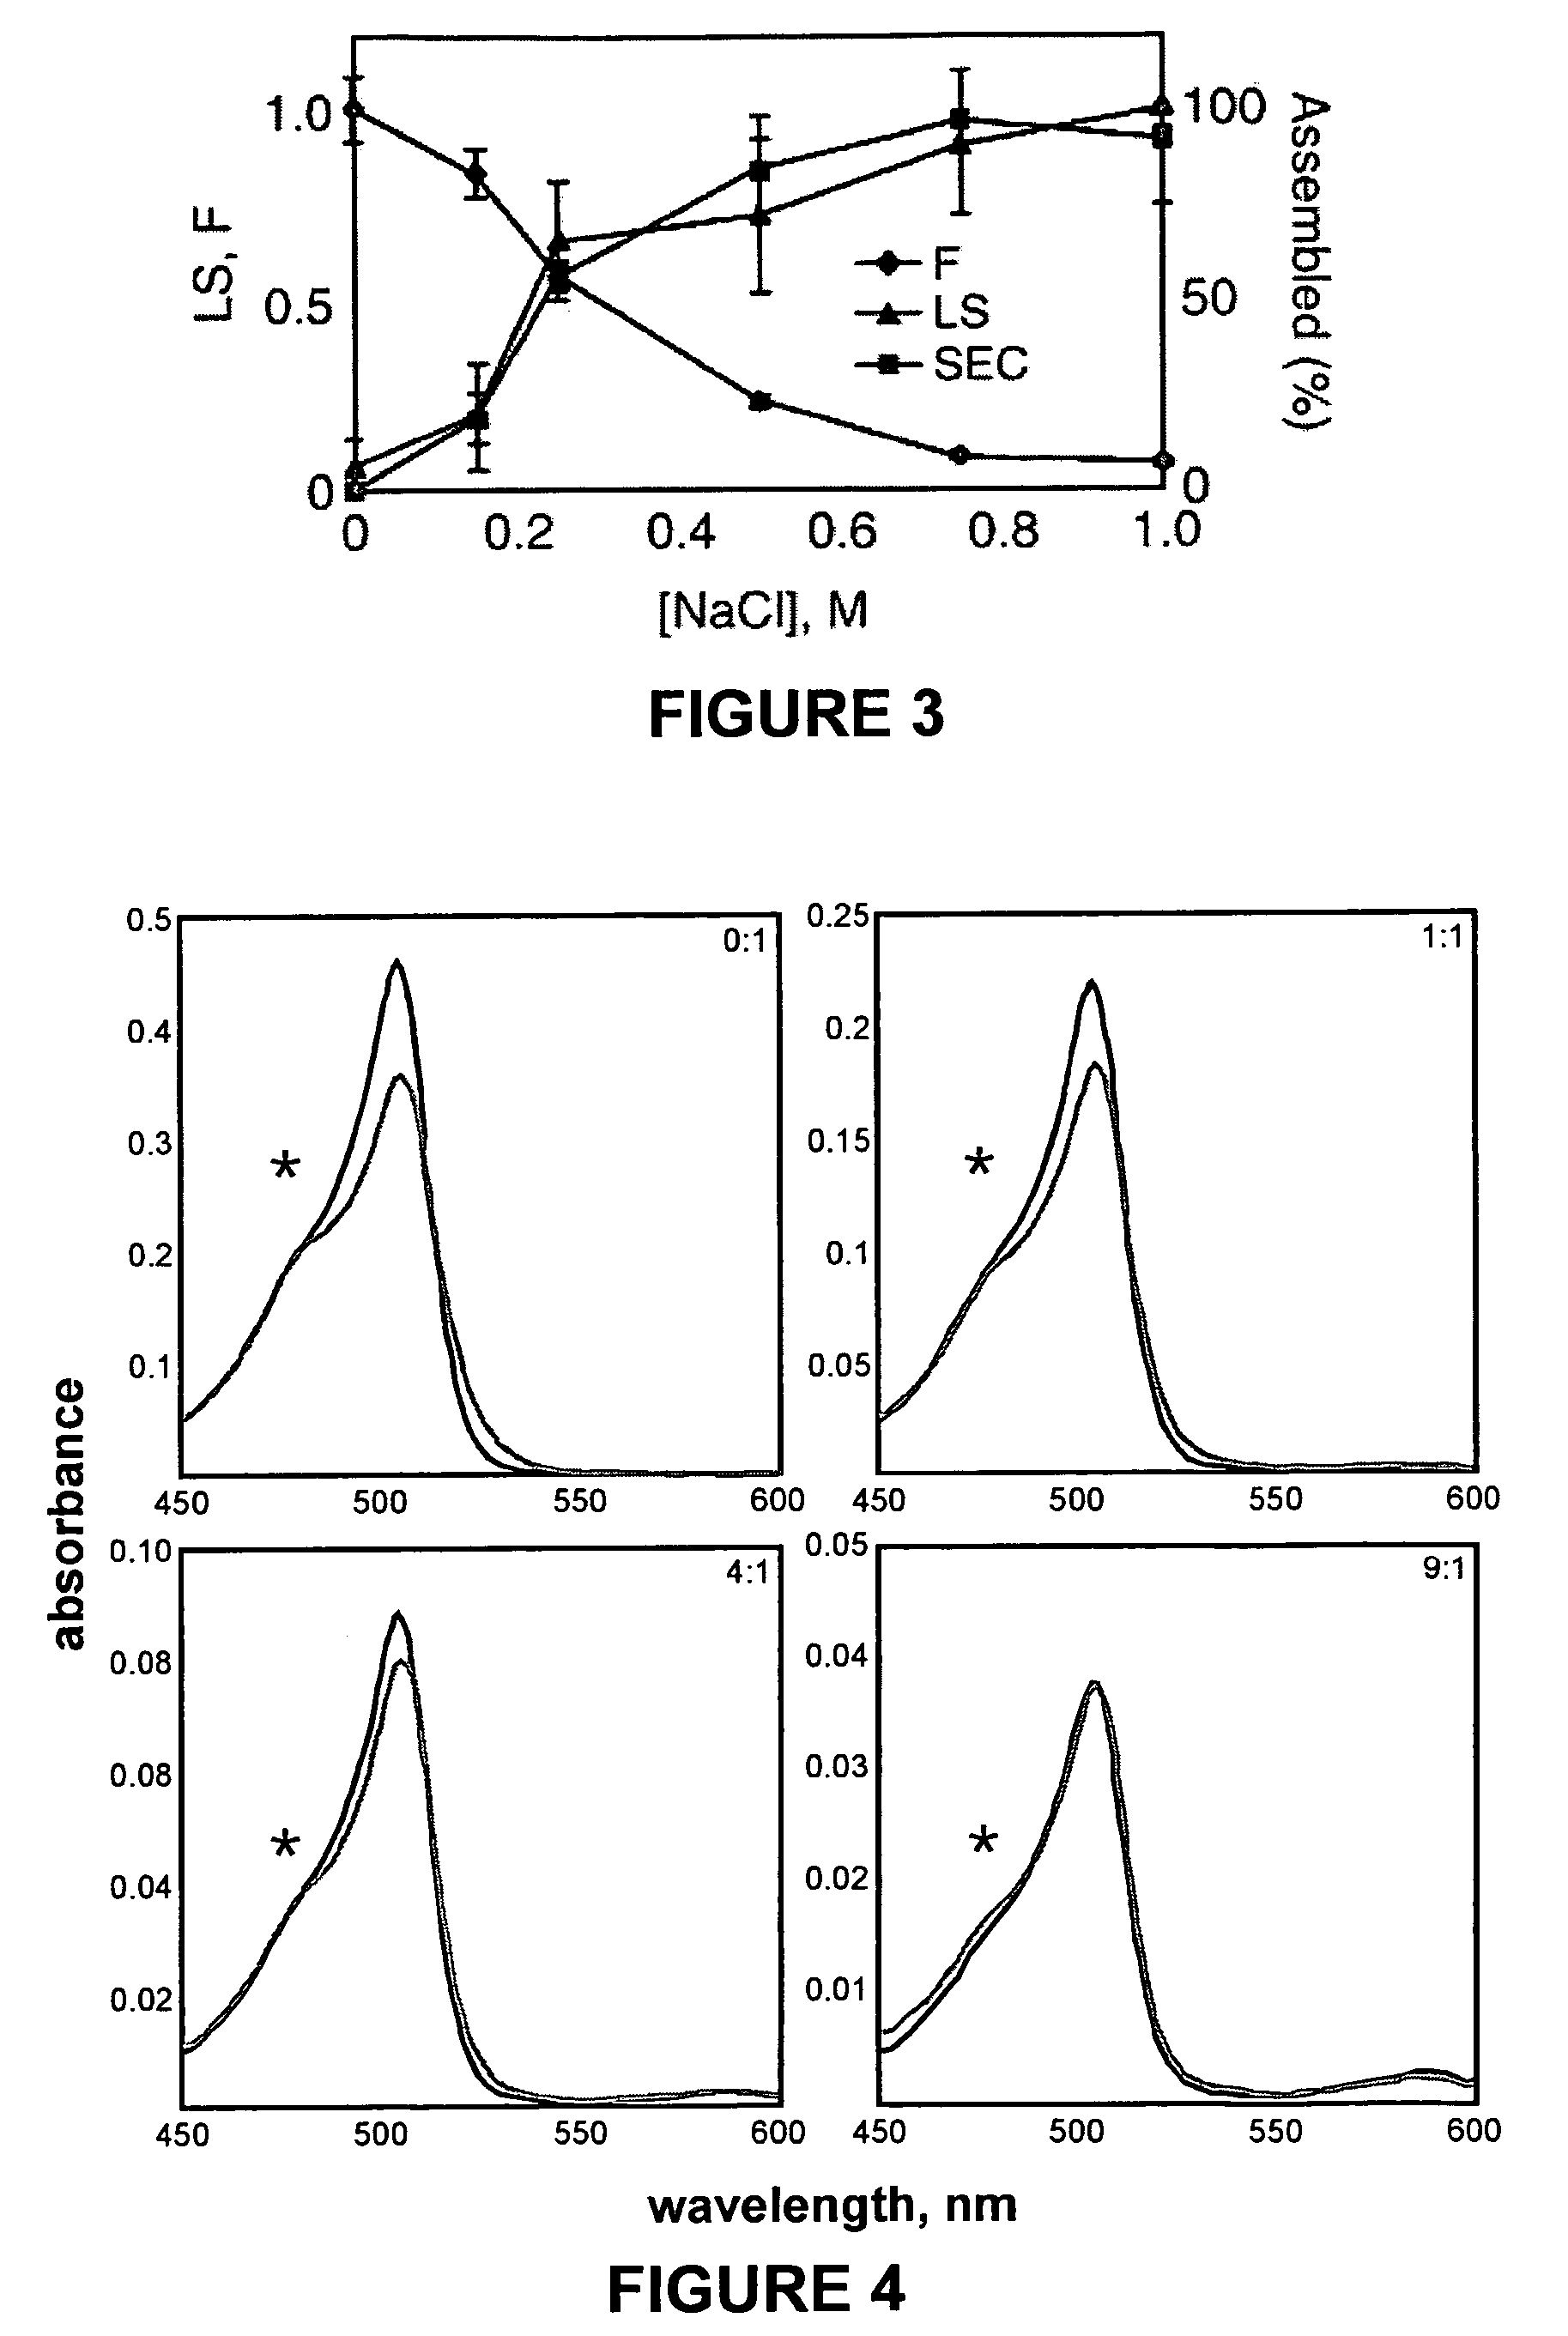 Methods for detecting compounds that interfere with protein aggregation utilizing an in vitro fluorescence-based assay